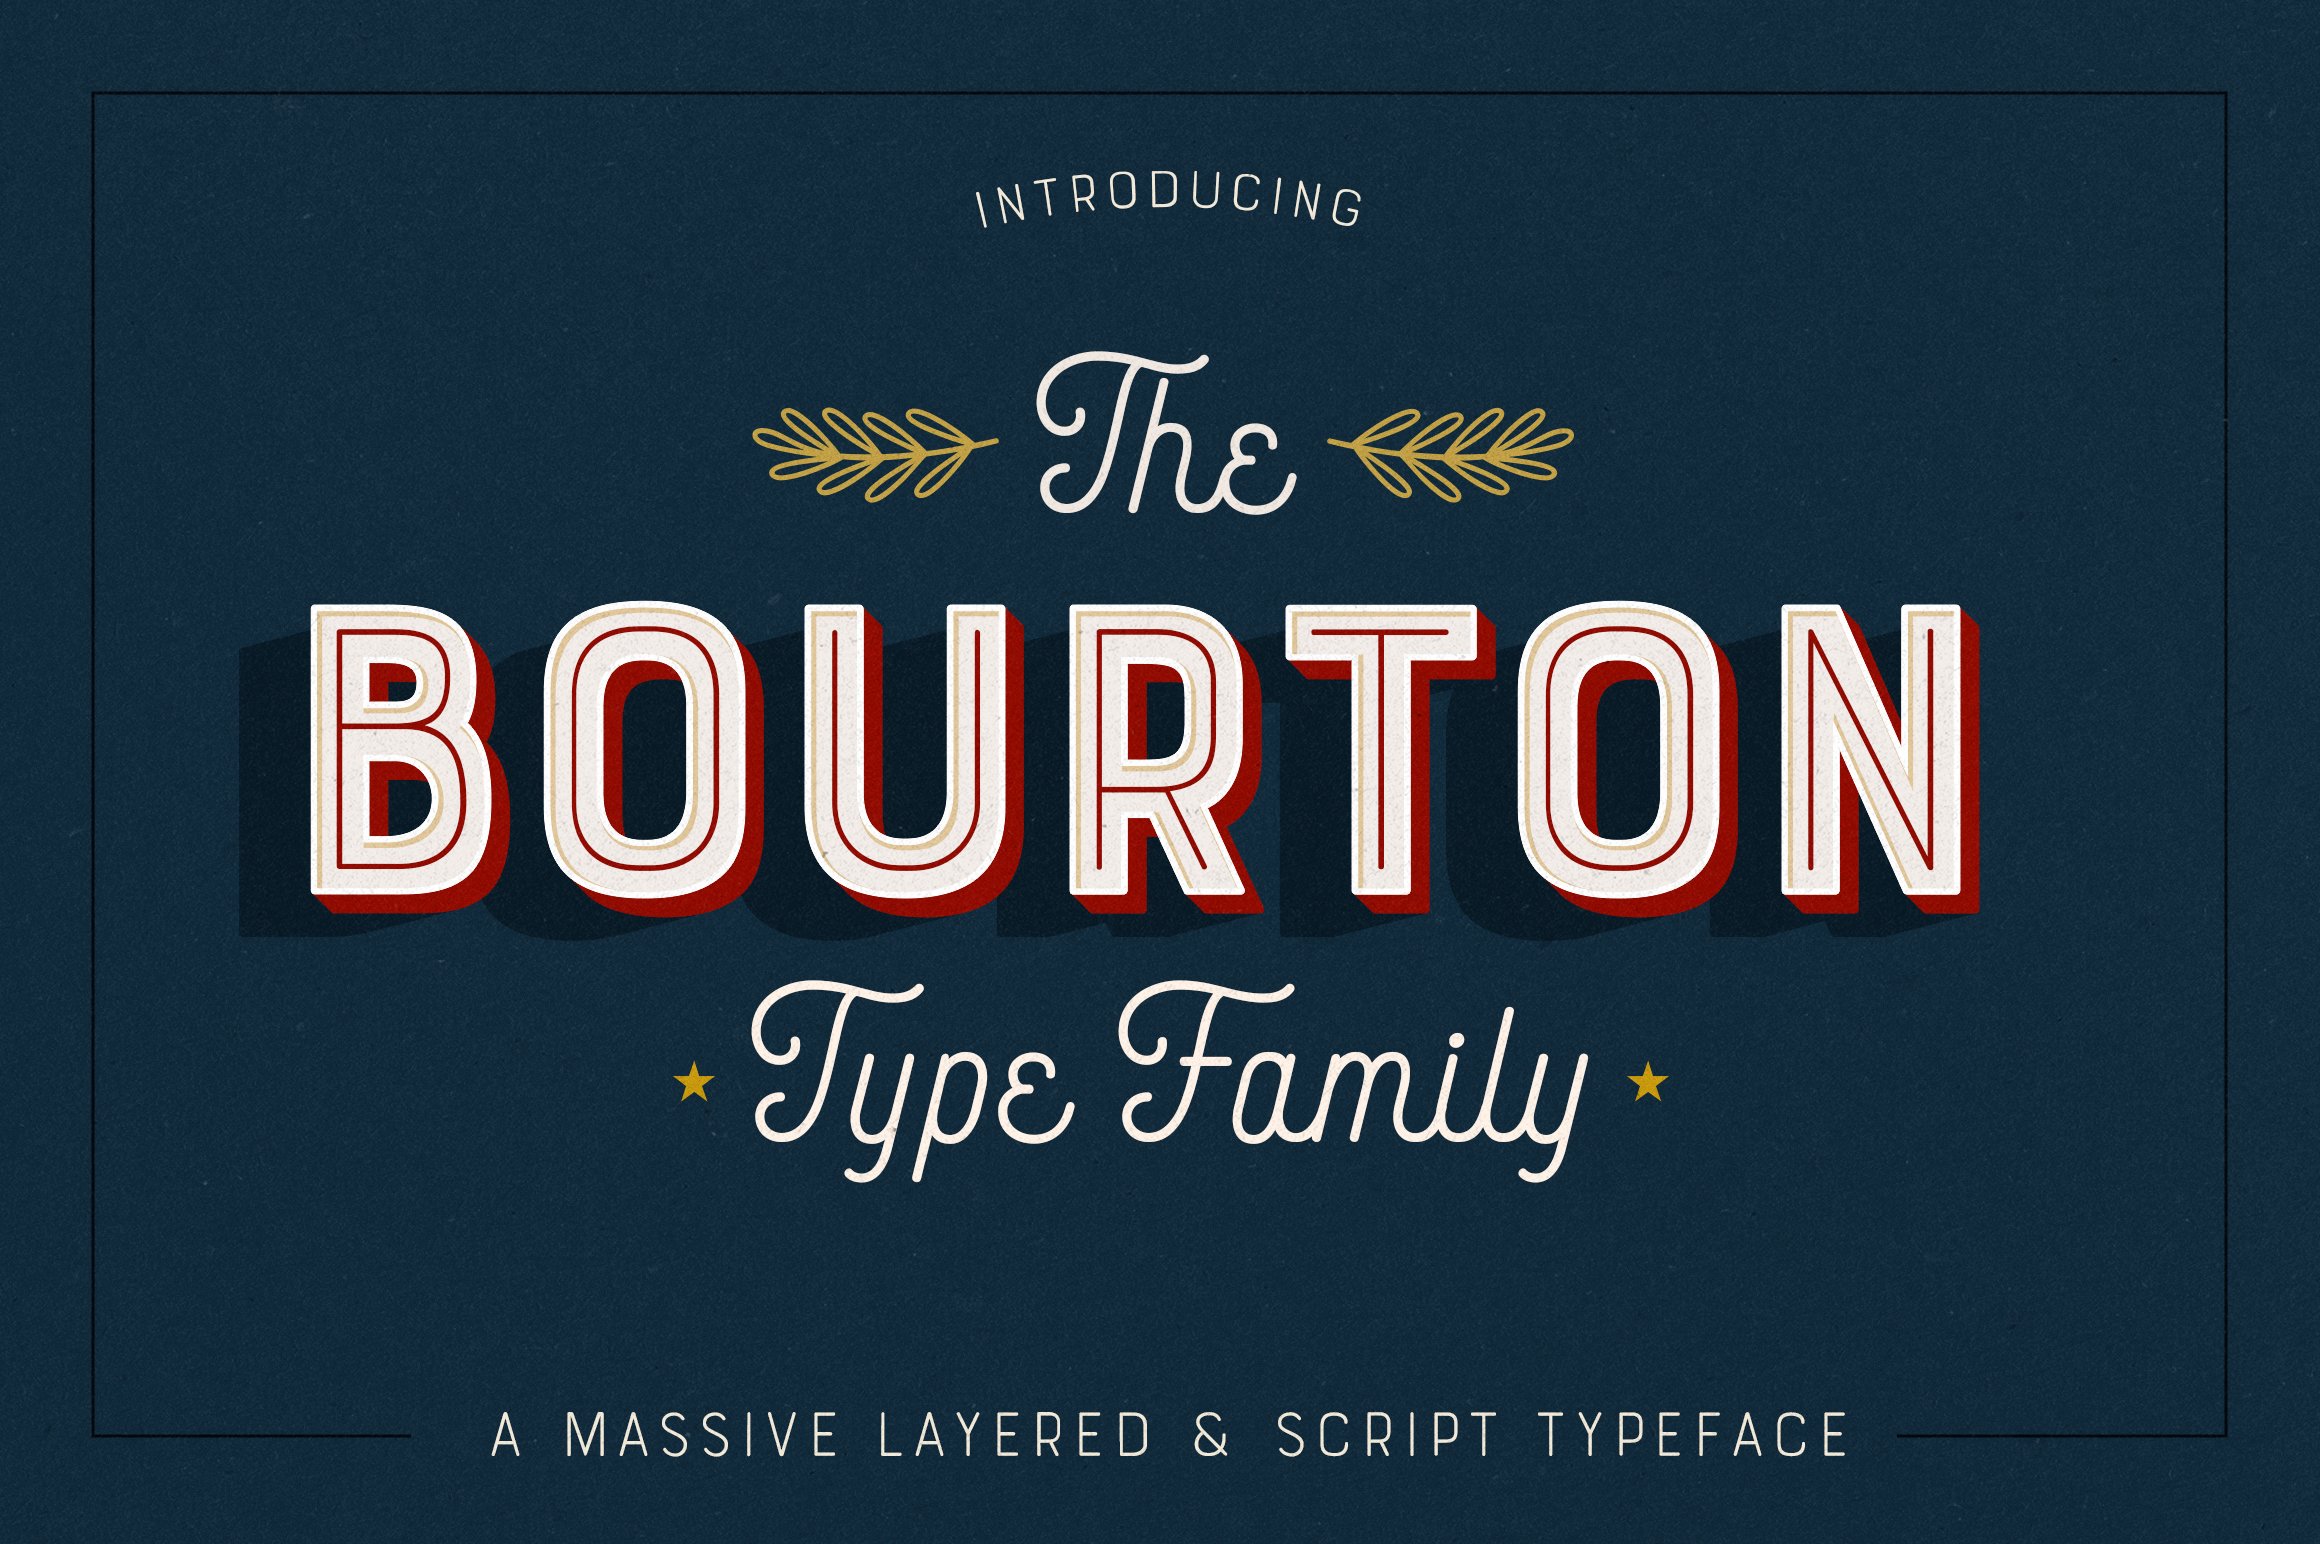 Bourton Typeface cover image.